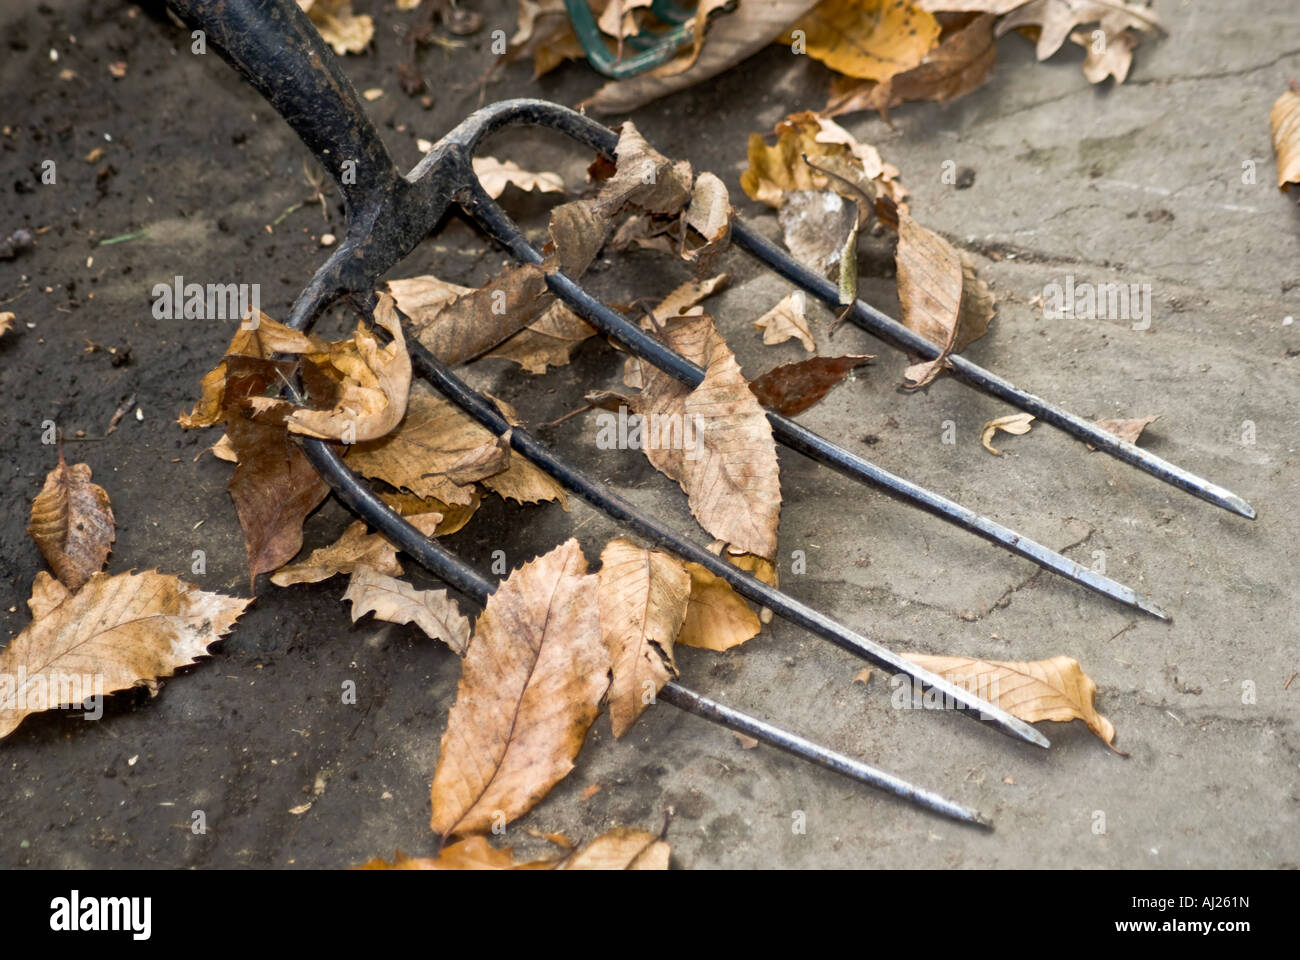 Autumn leaves caught Tines of an old garden fork Stock Photo